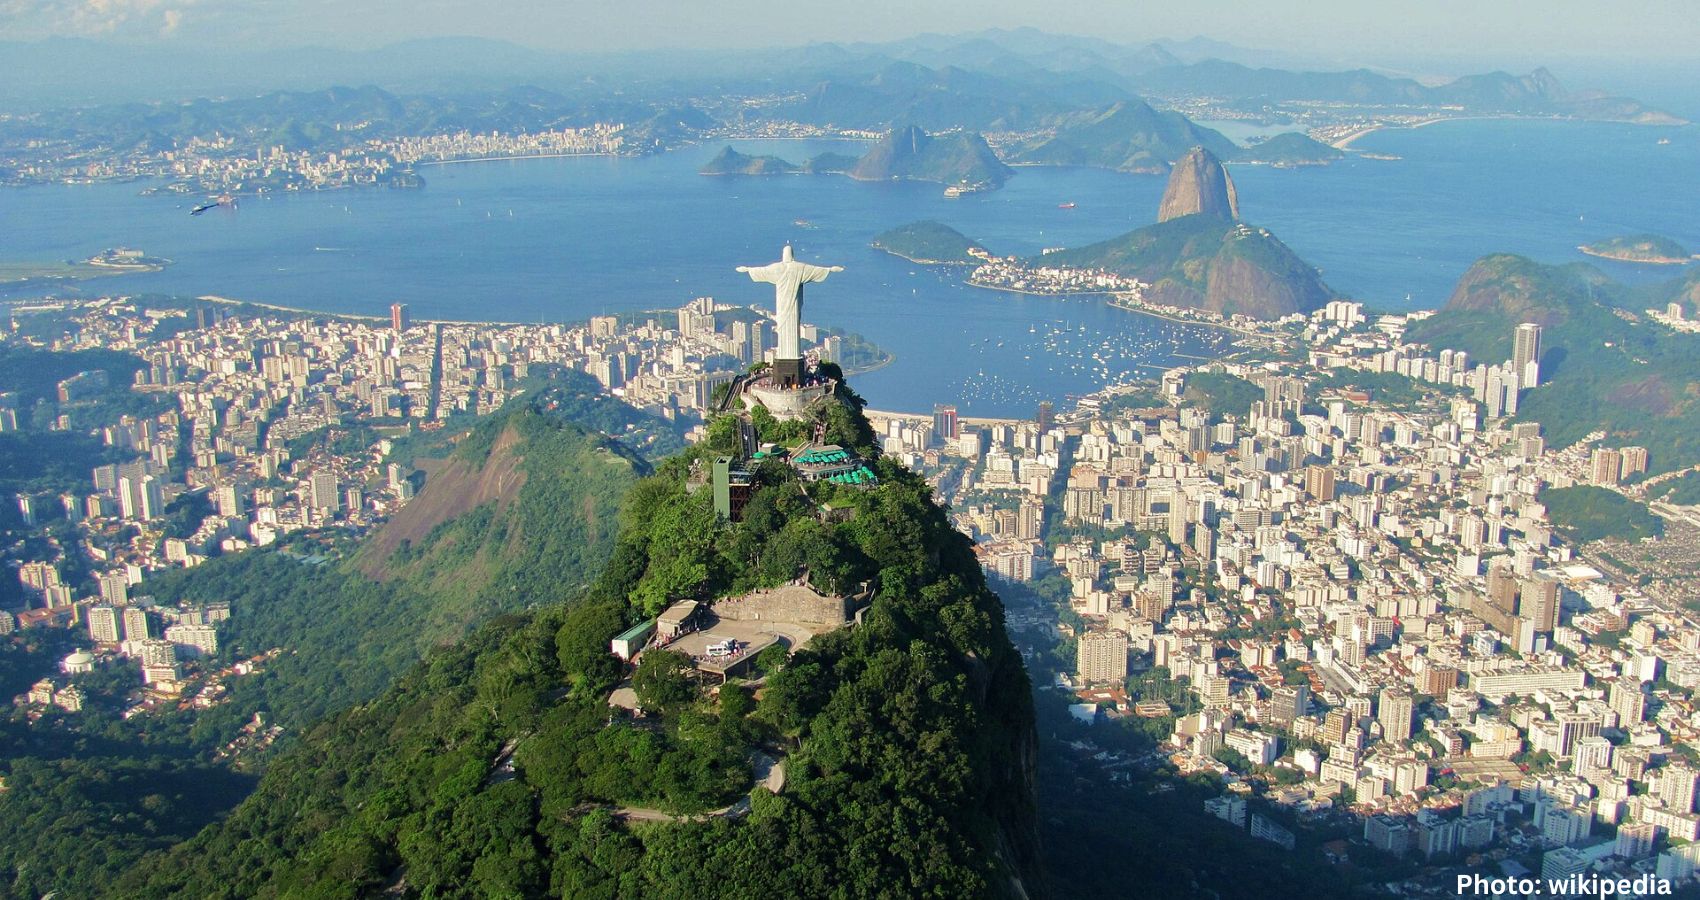 Brazilian Outbound Tourism Booms with New Visa-Free Policy, Boosting Travel to Europe and Beyond